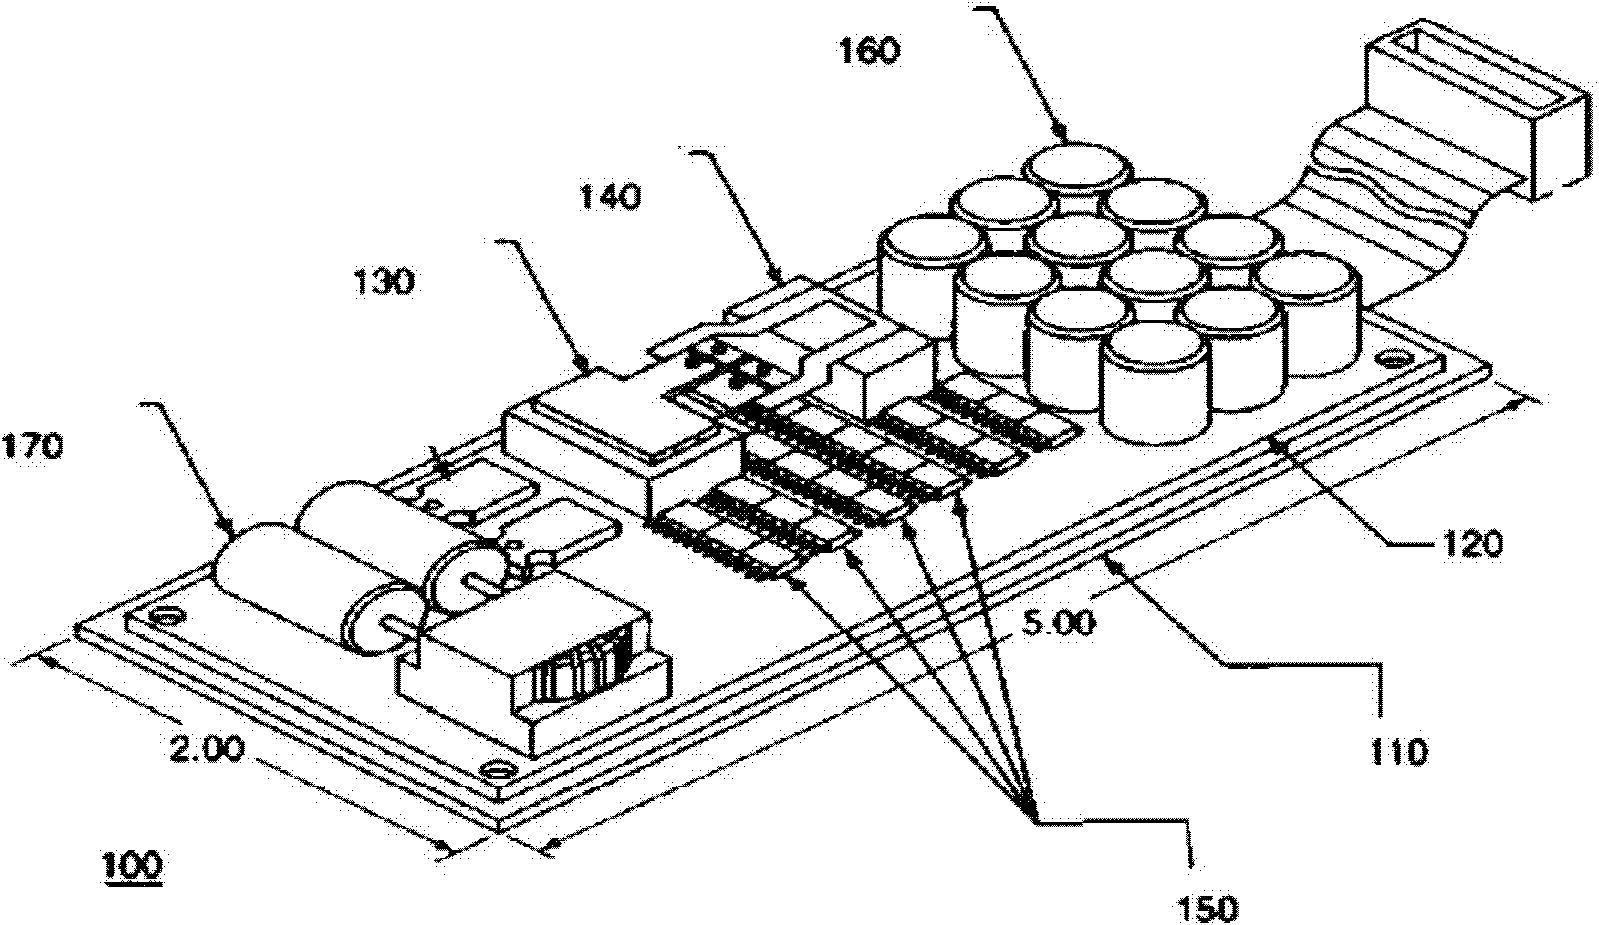 Electronic system with a composite substrate